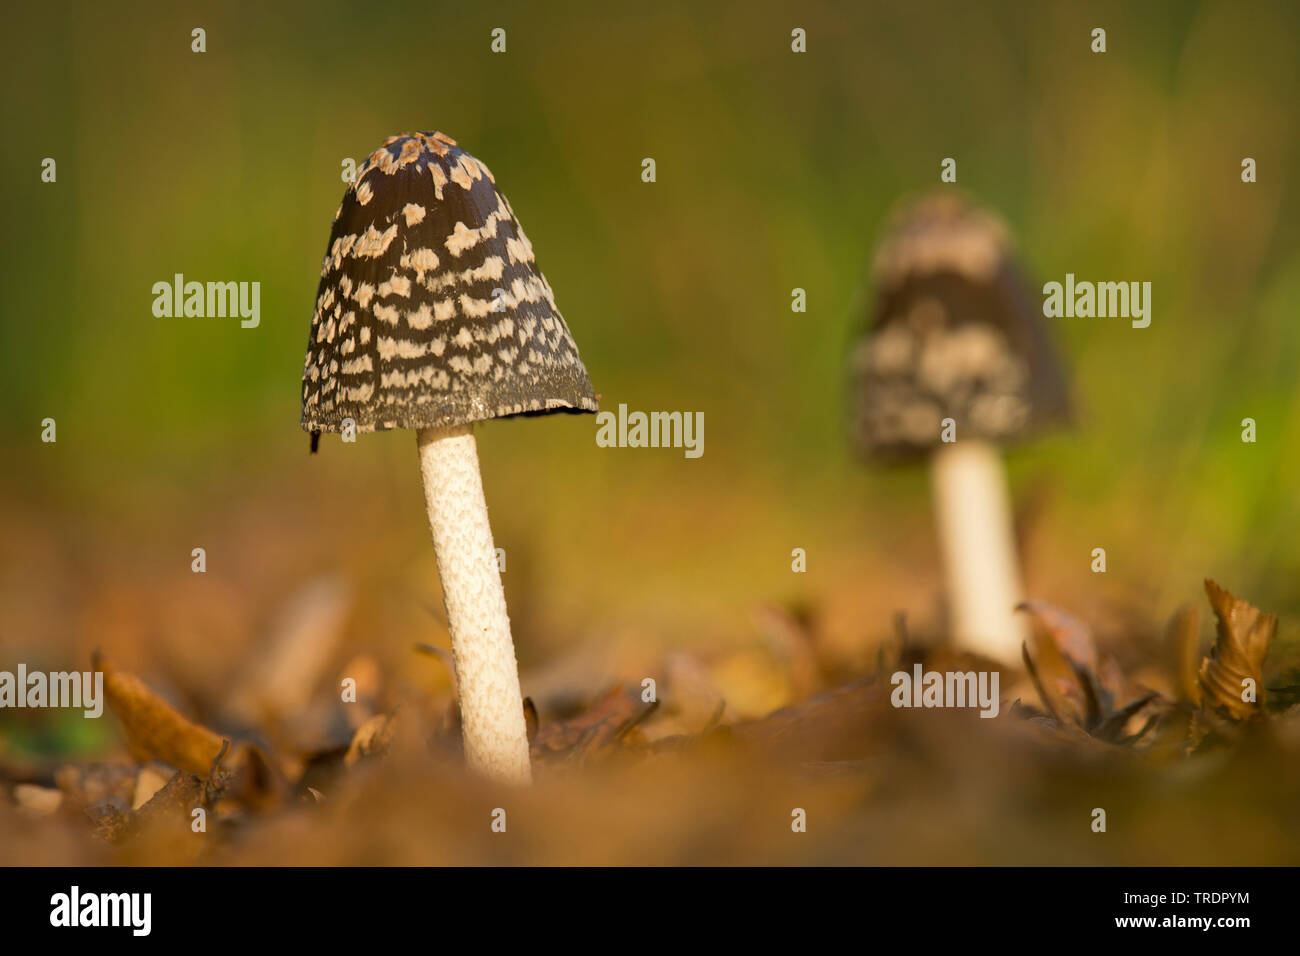 Magpie inkcap, Magpie Fungus (Coprinus picaceus, Coprinopsis picaceus), on forest ground, Hungary Stock Photo